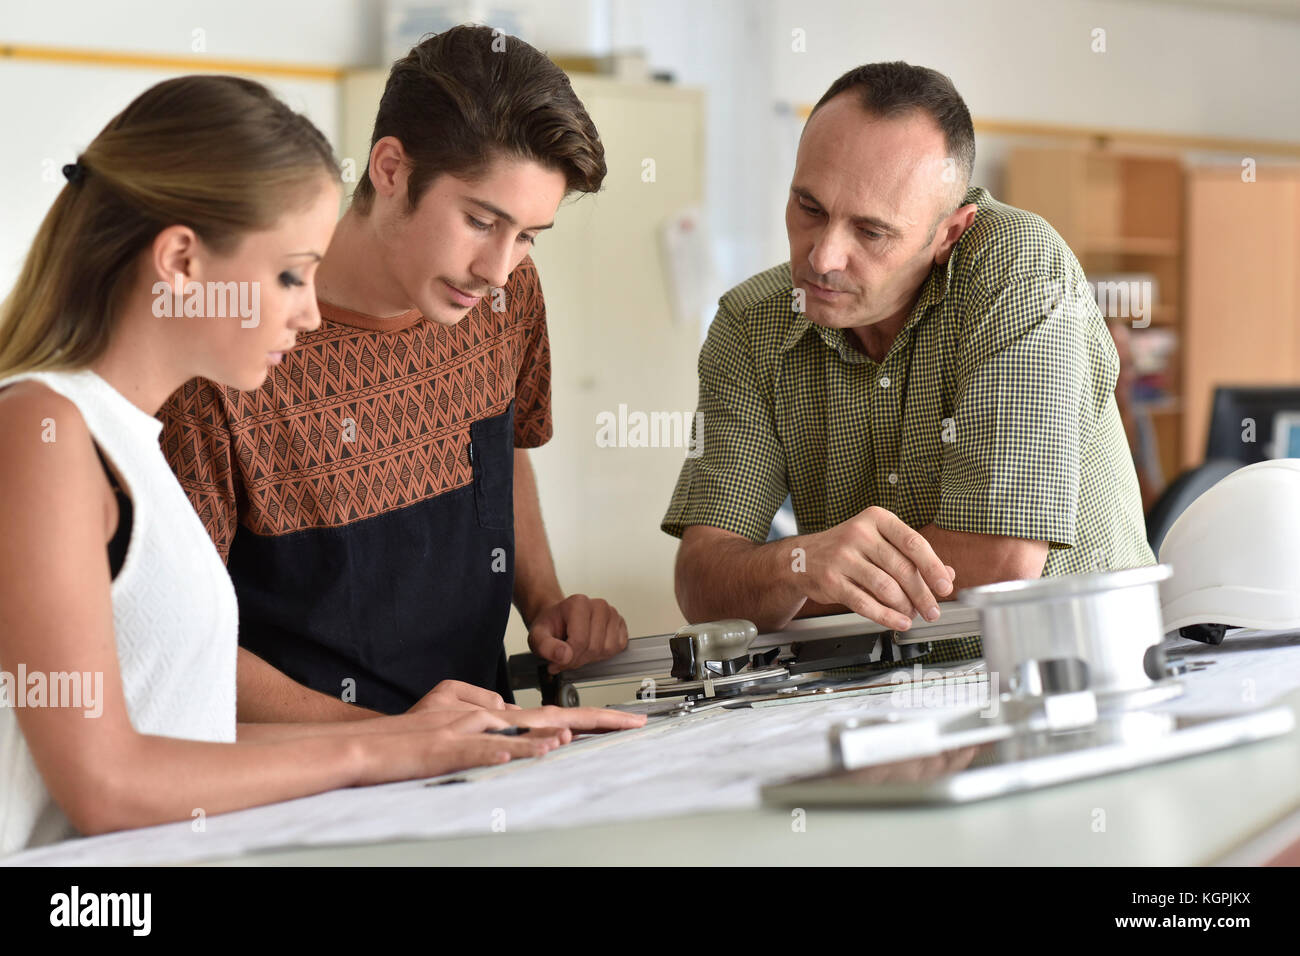 Young people in engineering training class Stock Photo